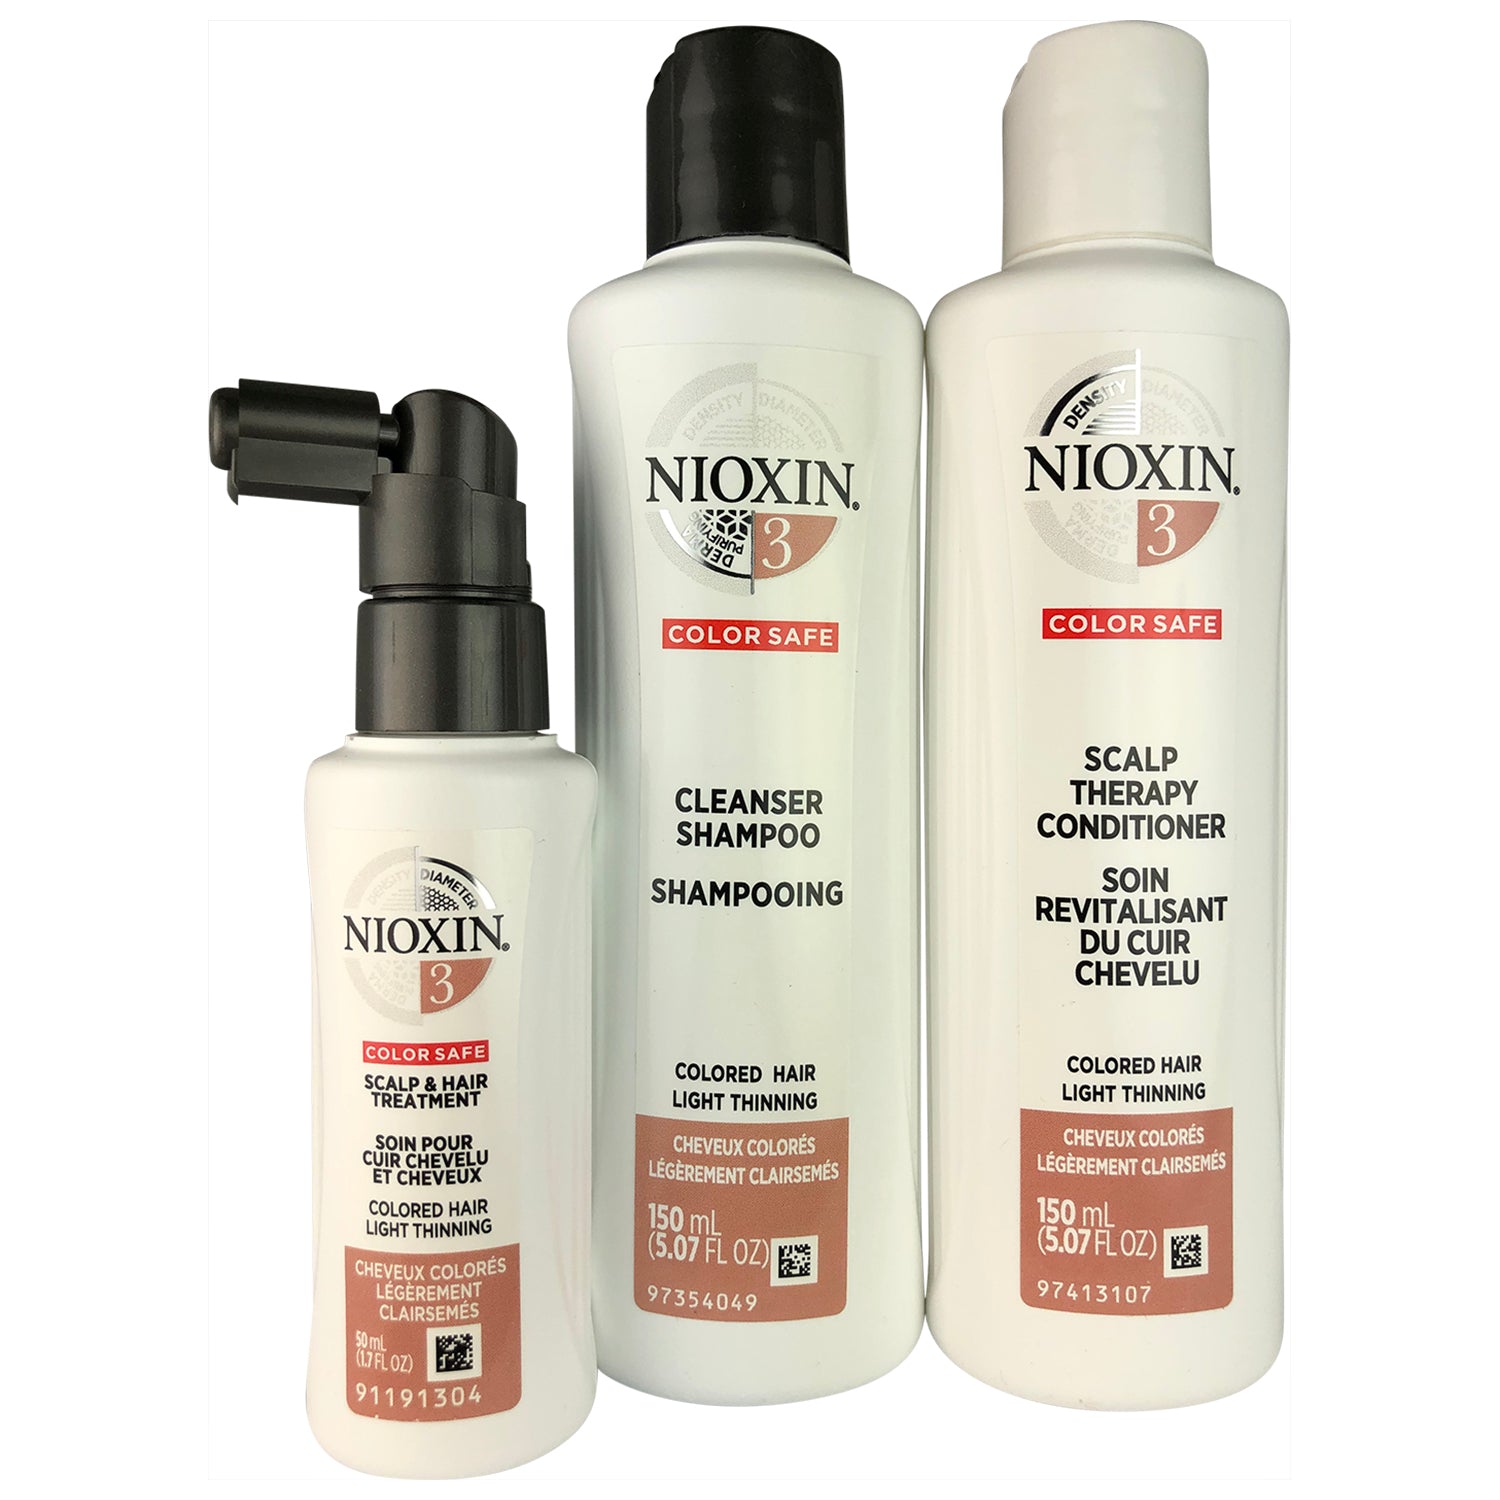 Nioxin System 3 Trial Kit (Cleanser Shampoo, Scalp Therapy Conditioner, Scalp & Hair Treatment)